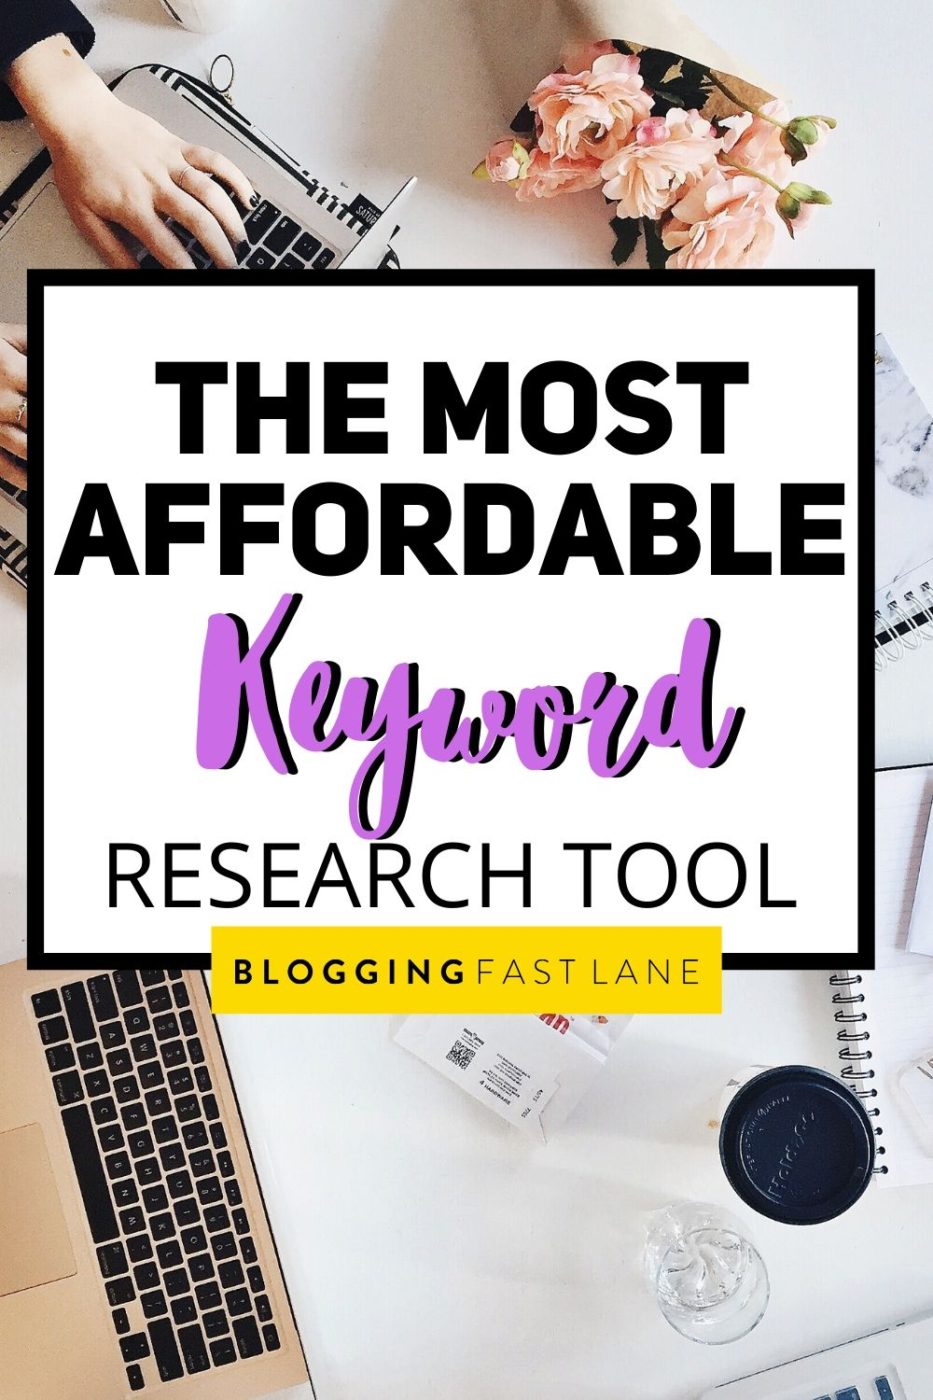 Keysearch Review | Is Keysearch worth it? Keyword research tool for blogging #blogging #keywordresearch